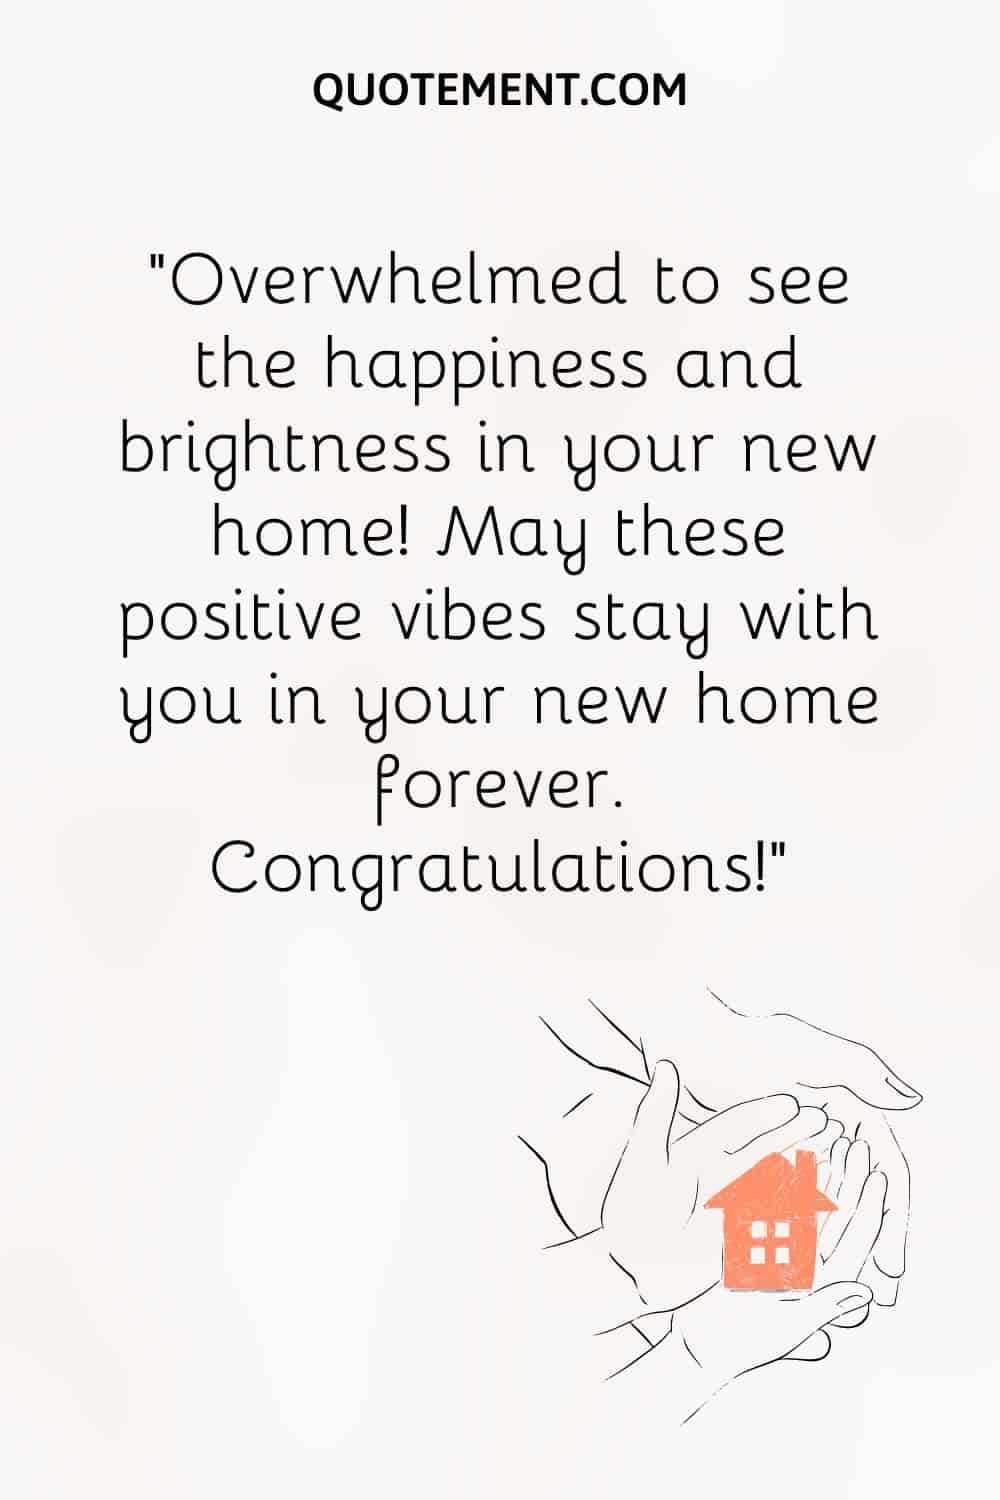 Overwhelmed to see the happiness and brightness in your new home!